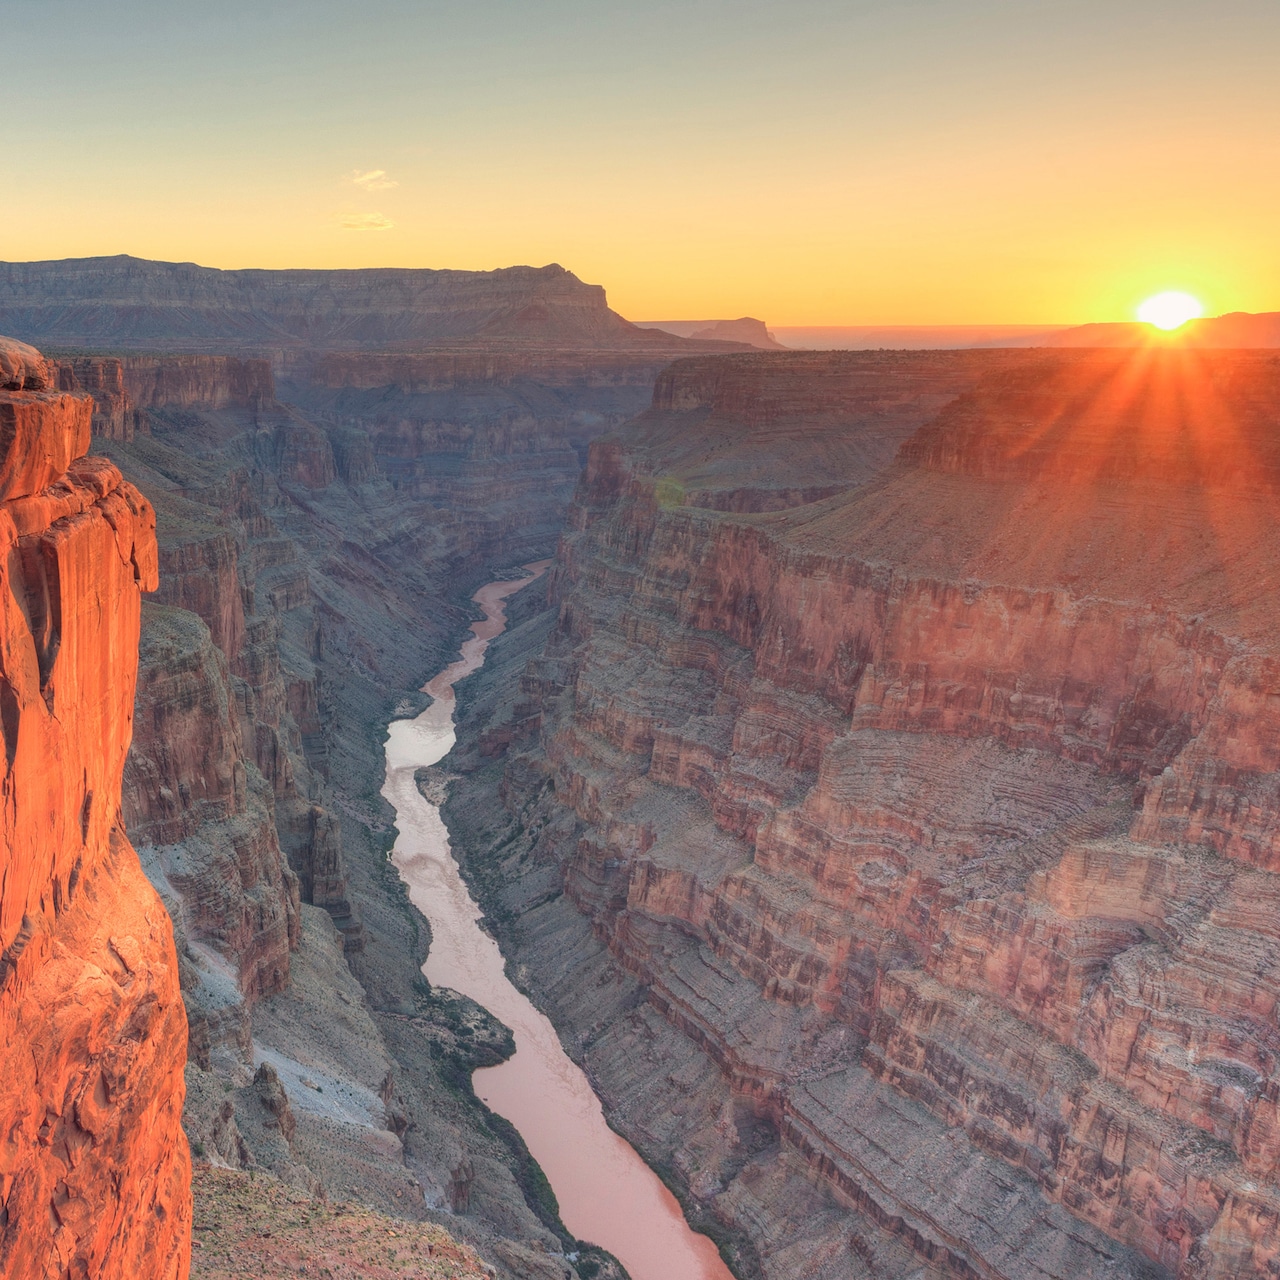 Grand Canyon Vacation  Trip Packages  Adventures by Disney